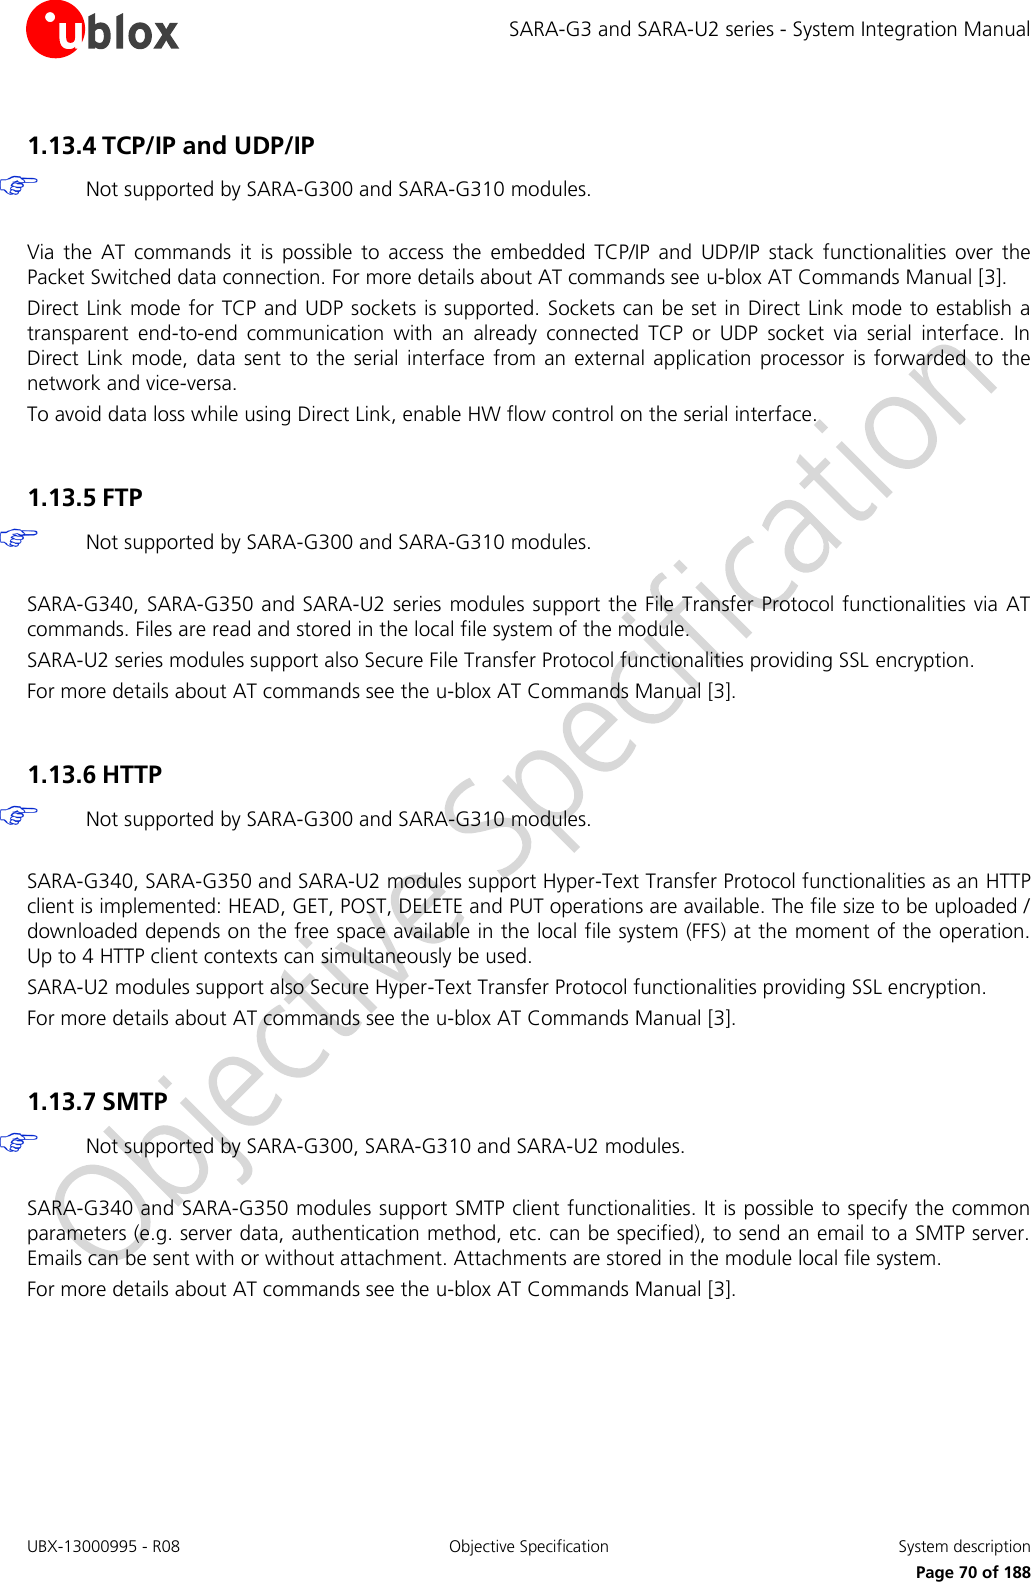 SARA-G3 and SARA-U2 series - System Integration Manual UBX-13000995 - R08  Objective Specification  System description     Page 70 of 188 1.13.4 TCP/IP and UDP/IP   Not supported by SARA-G300 and SARA-G310 modules.  Via  the  AT  commands  it  is  possible  to  access  the  embedded  TCP/IP  and  UDP/IP  stack  functionalities  over  the Packet Switched data connection. For more details about AT commands see u-blox AT Commands Manual [3]. Direct Link mode for TCP and UDP sockets is supported. Sockets can be set in Direct Link mode to establish a transparent  end-to-end  communication  with  an  already  connected  TCP  or  UDP  socket  via  serial  interface.  In Direct  Link  mode,  data sent  to the serial  interface from  an  external  application processor  is forwarded  to  the network and vice-versa. To avoid data loss while using Direct Link, enable HW flow control on the serial interface.  1.13.5 FTP   Not supported by SARA-G300 and SARA-G310 modules.  SARA-G340, SARA-G350 and SARA-U2 series  modules support the File Transfer Protocol functionalities via AT commands. Files are read and stored in the local file system of the module. SARA-U2 series modules support also Secure File Transfer Protocol functionalities providing SSL encryption. For more details about AT commands see the u-blox AT Commands Manual [3].  1.13.6 HTTP   Not supported by SARA-G300 and SARA-G310 modules.  SARA-G340, SARA-G350 and SARA-U2 modules support Hyper-Text Transfer Protocol functionalities as an HTTP client is implemented: HEAD, GET, POST, DELETE and PUT operations are available. The file size to be uploaded / downloaded depends on the free space available in the local file system (FFS) at the moment of the operation. Up to 4 HTTP client contexts can simultaneously be used. SARA-U2 modules support also Secure Hyper-Text Transfer Protocol functionalities providing SSL encryption. For more details about AT commands see the u-blox AT Commands Manual [3].  1.13.7 SMTP   Not supported by SARA-G300, SARA-G310 and SARA-U2 modules.  SARA-G340 and SARA-G350 modules support SMTP client functionalities. It is possible to specify the common parameters (e.g. server data, authentication method, etc. can be specified), to send an email to a SMTP server. Emails can be sent with or without attachment. Attachments are stored in the module local file system. For more details about AT commands see the u-blox AT Commands Manual [3].  